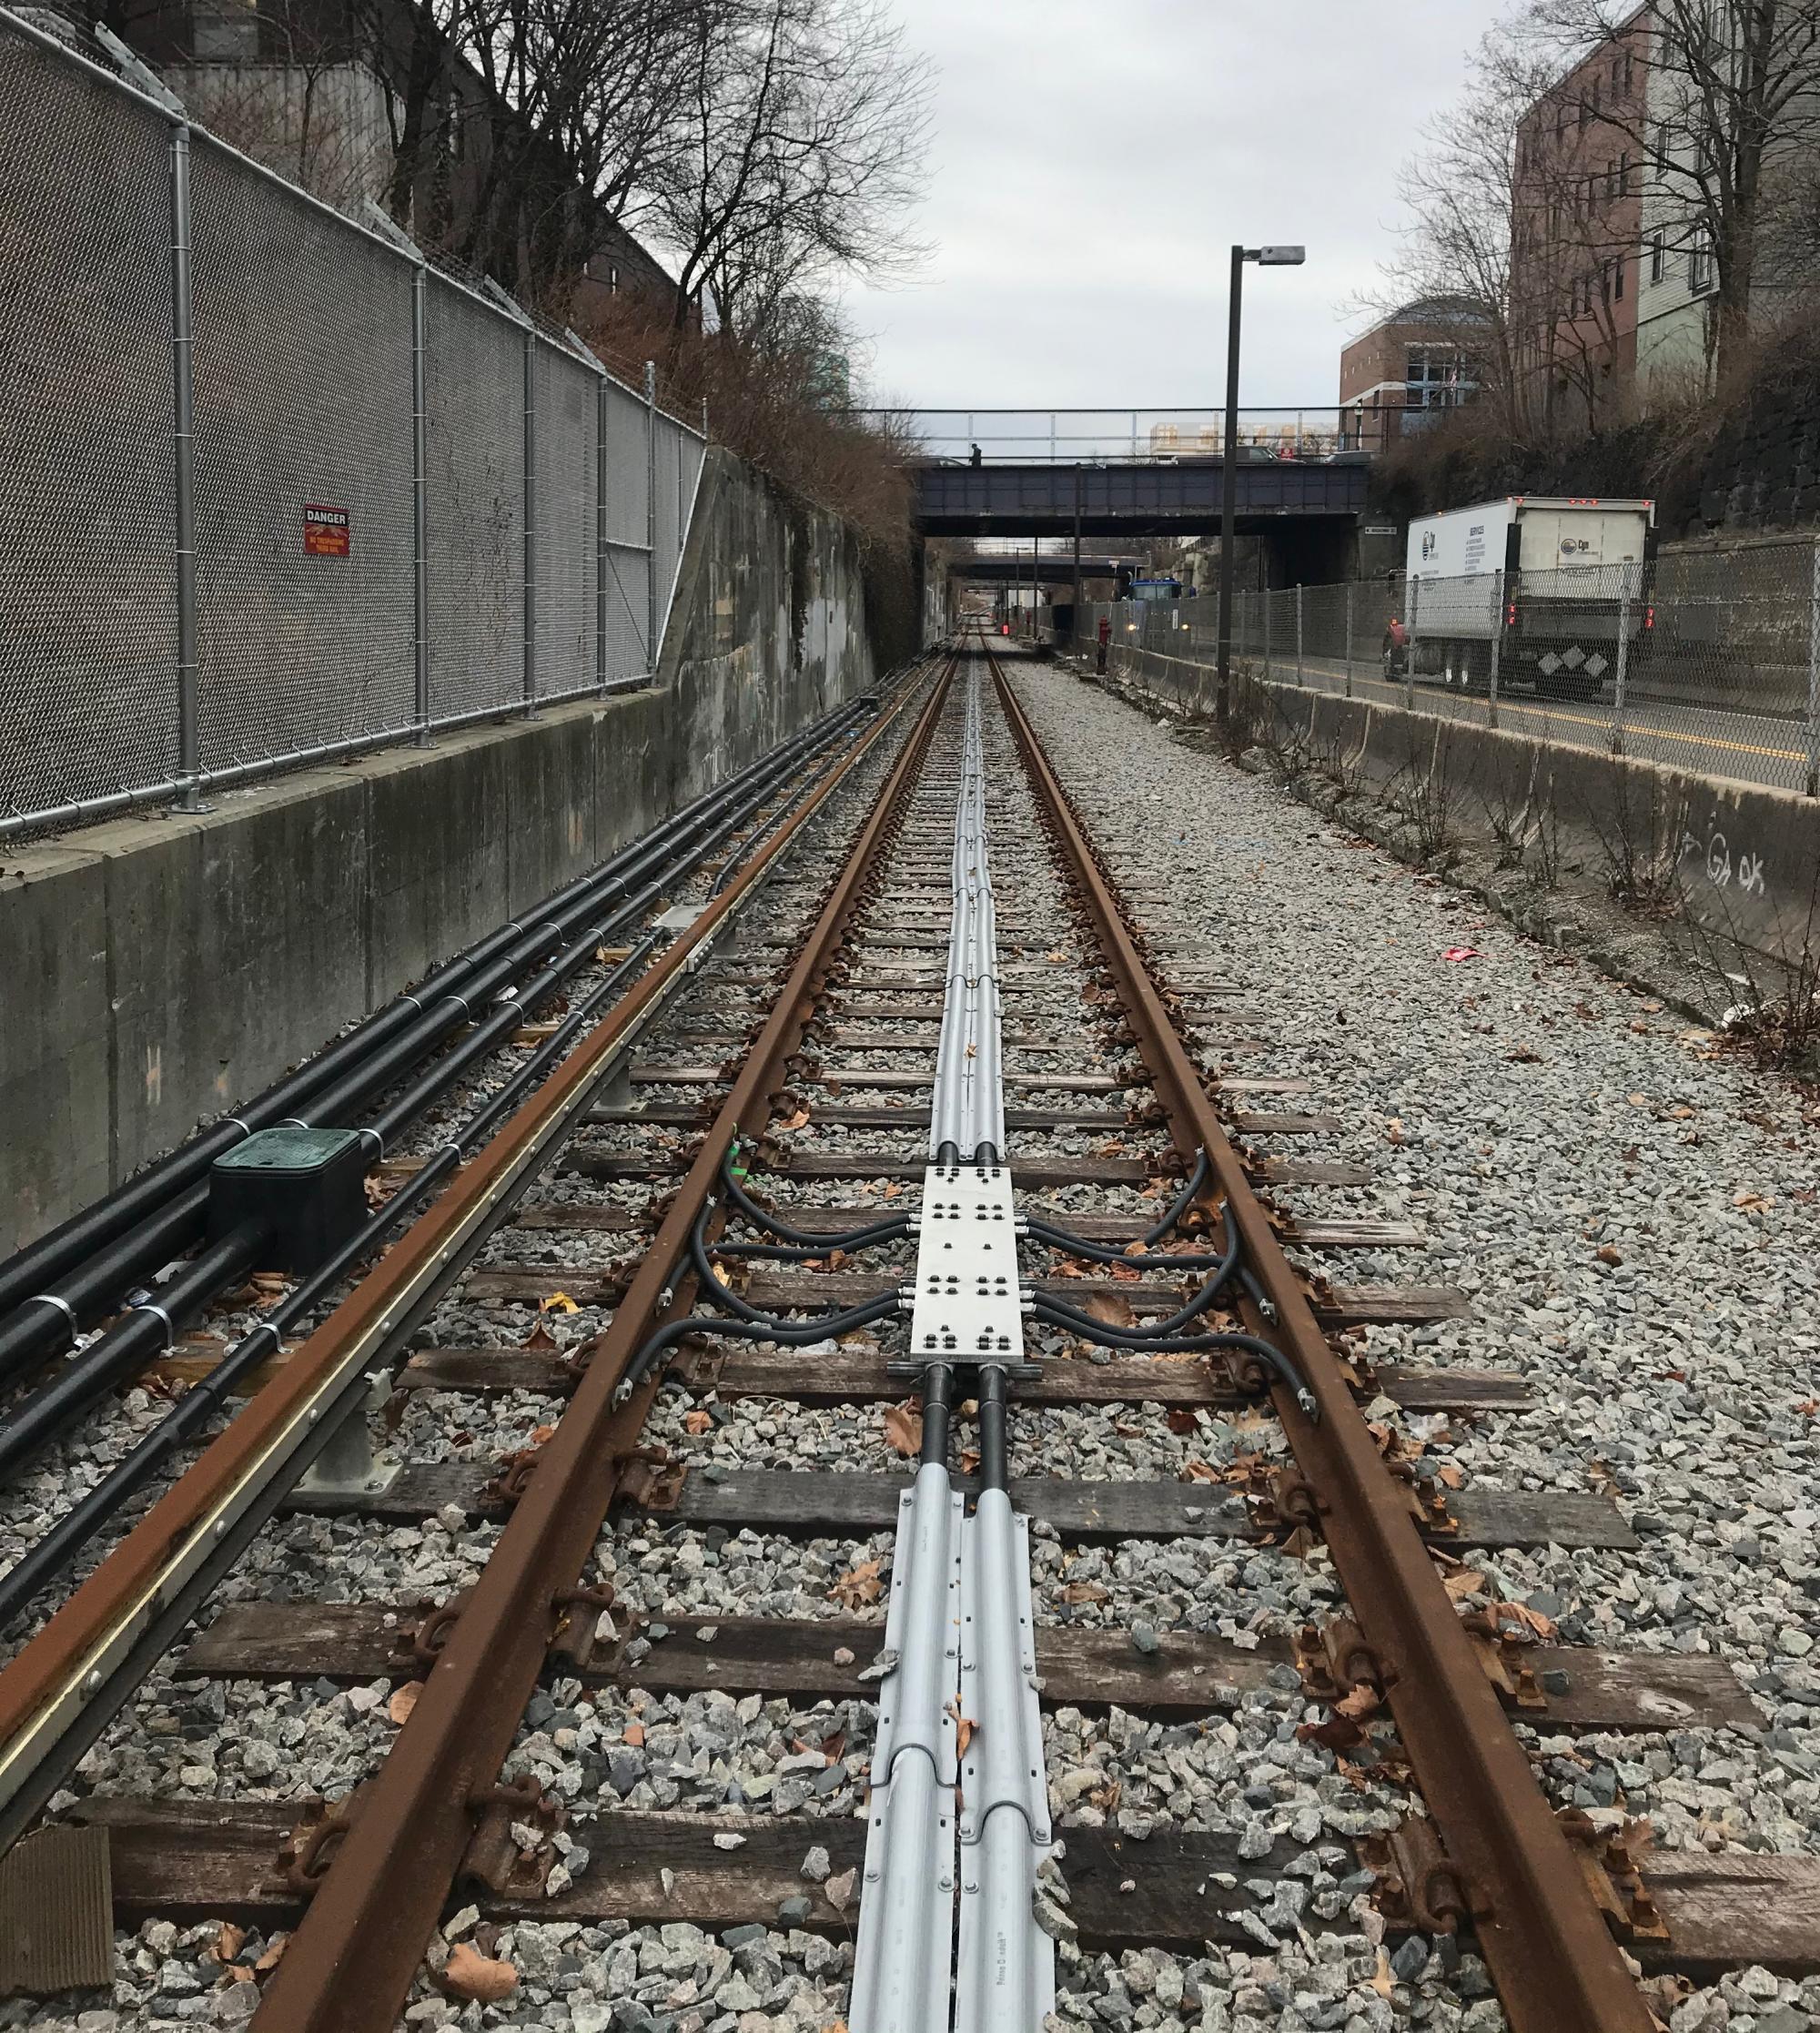 The Red Line test track is now ready to receive new vehicles for testing